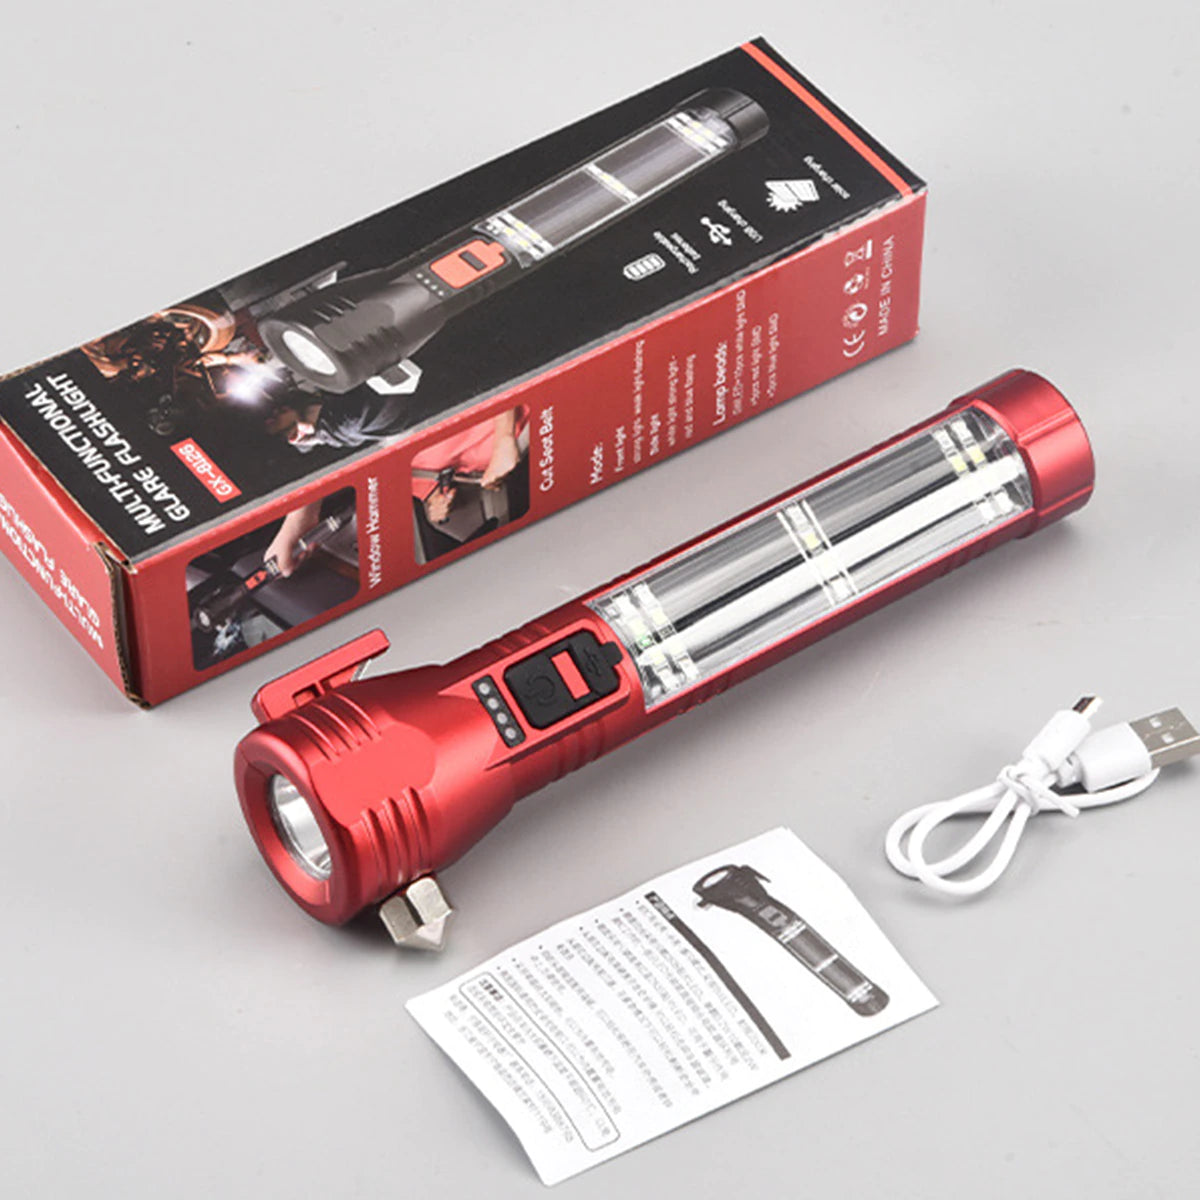 Flash light Solar Powered Waterproof USB Rechargeable torch, Torch Price in Pakistan